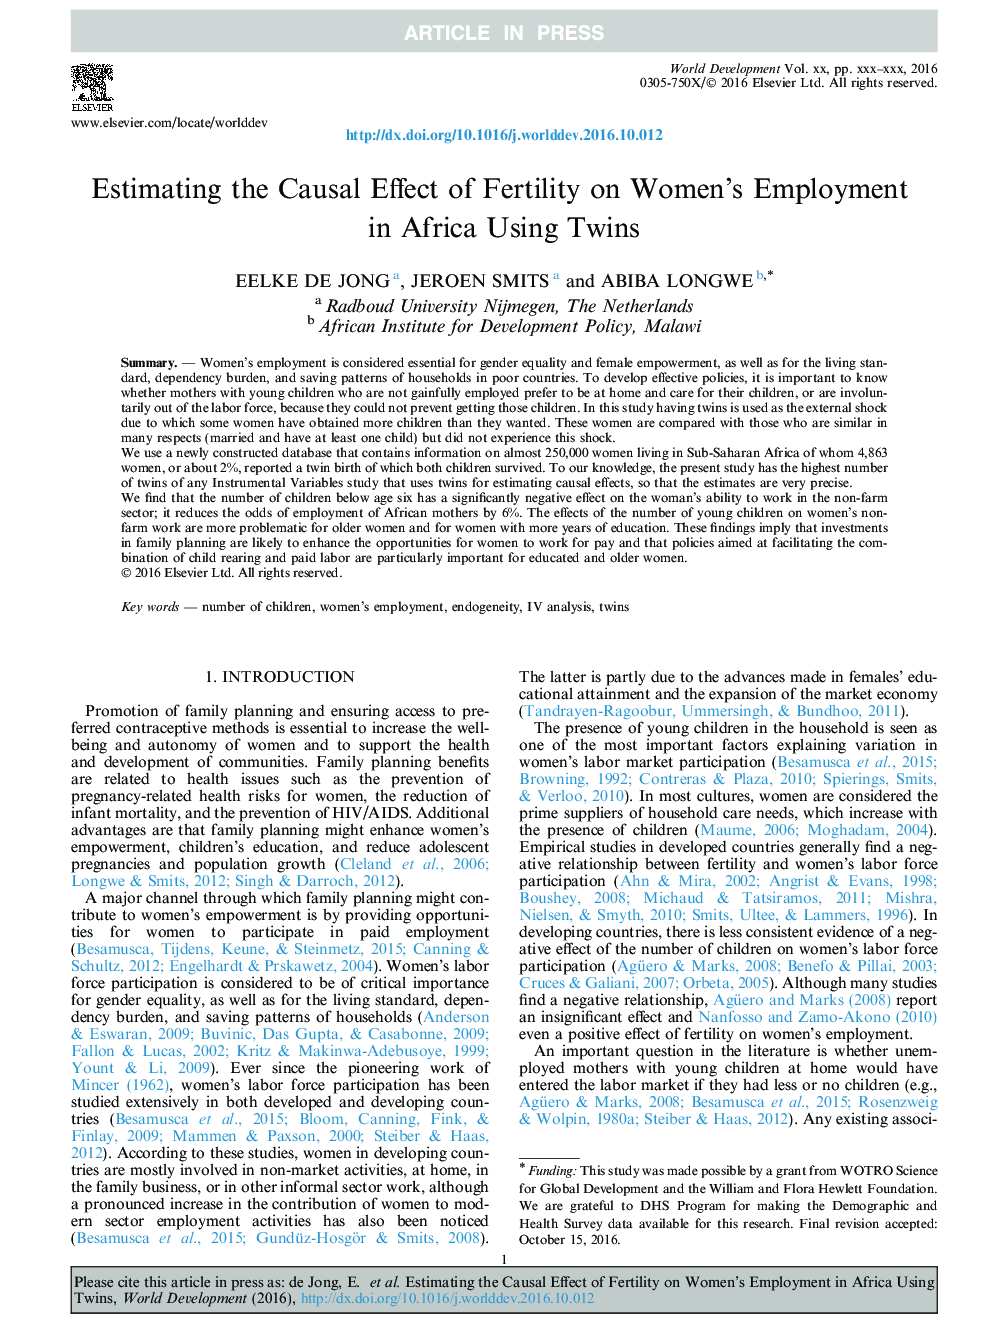 Estimating the Causal Effect of Fertility on Women's Employment in Africa Using Twins